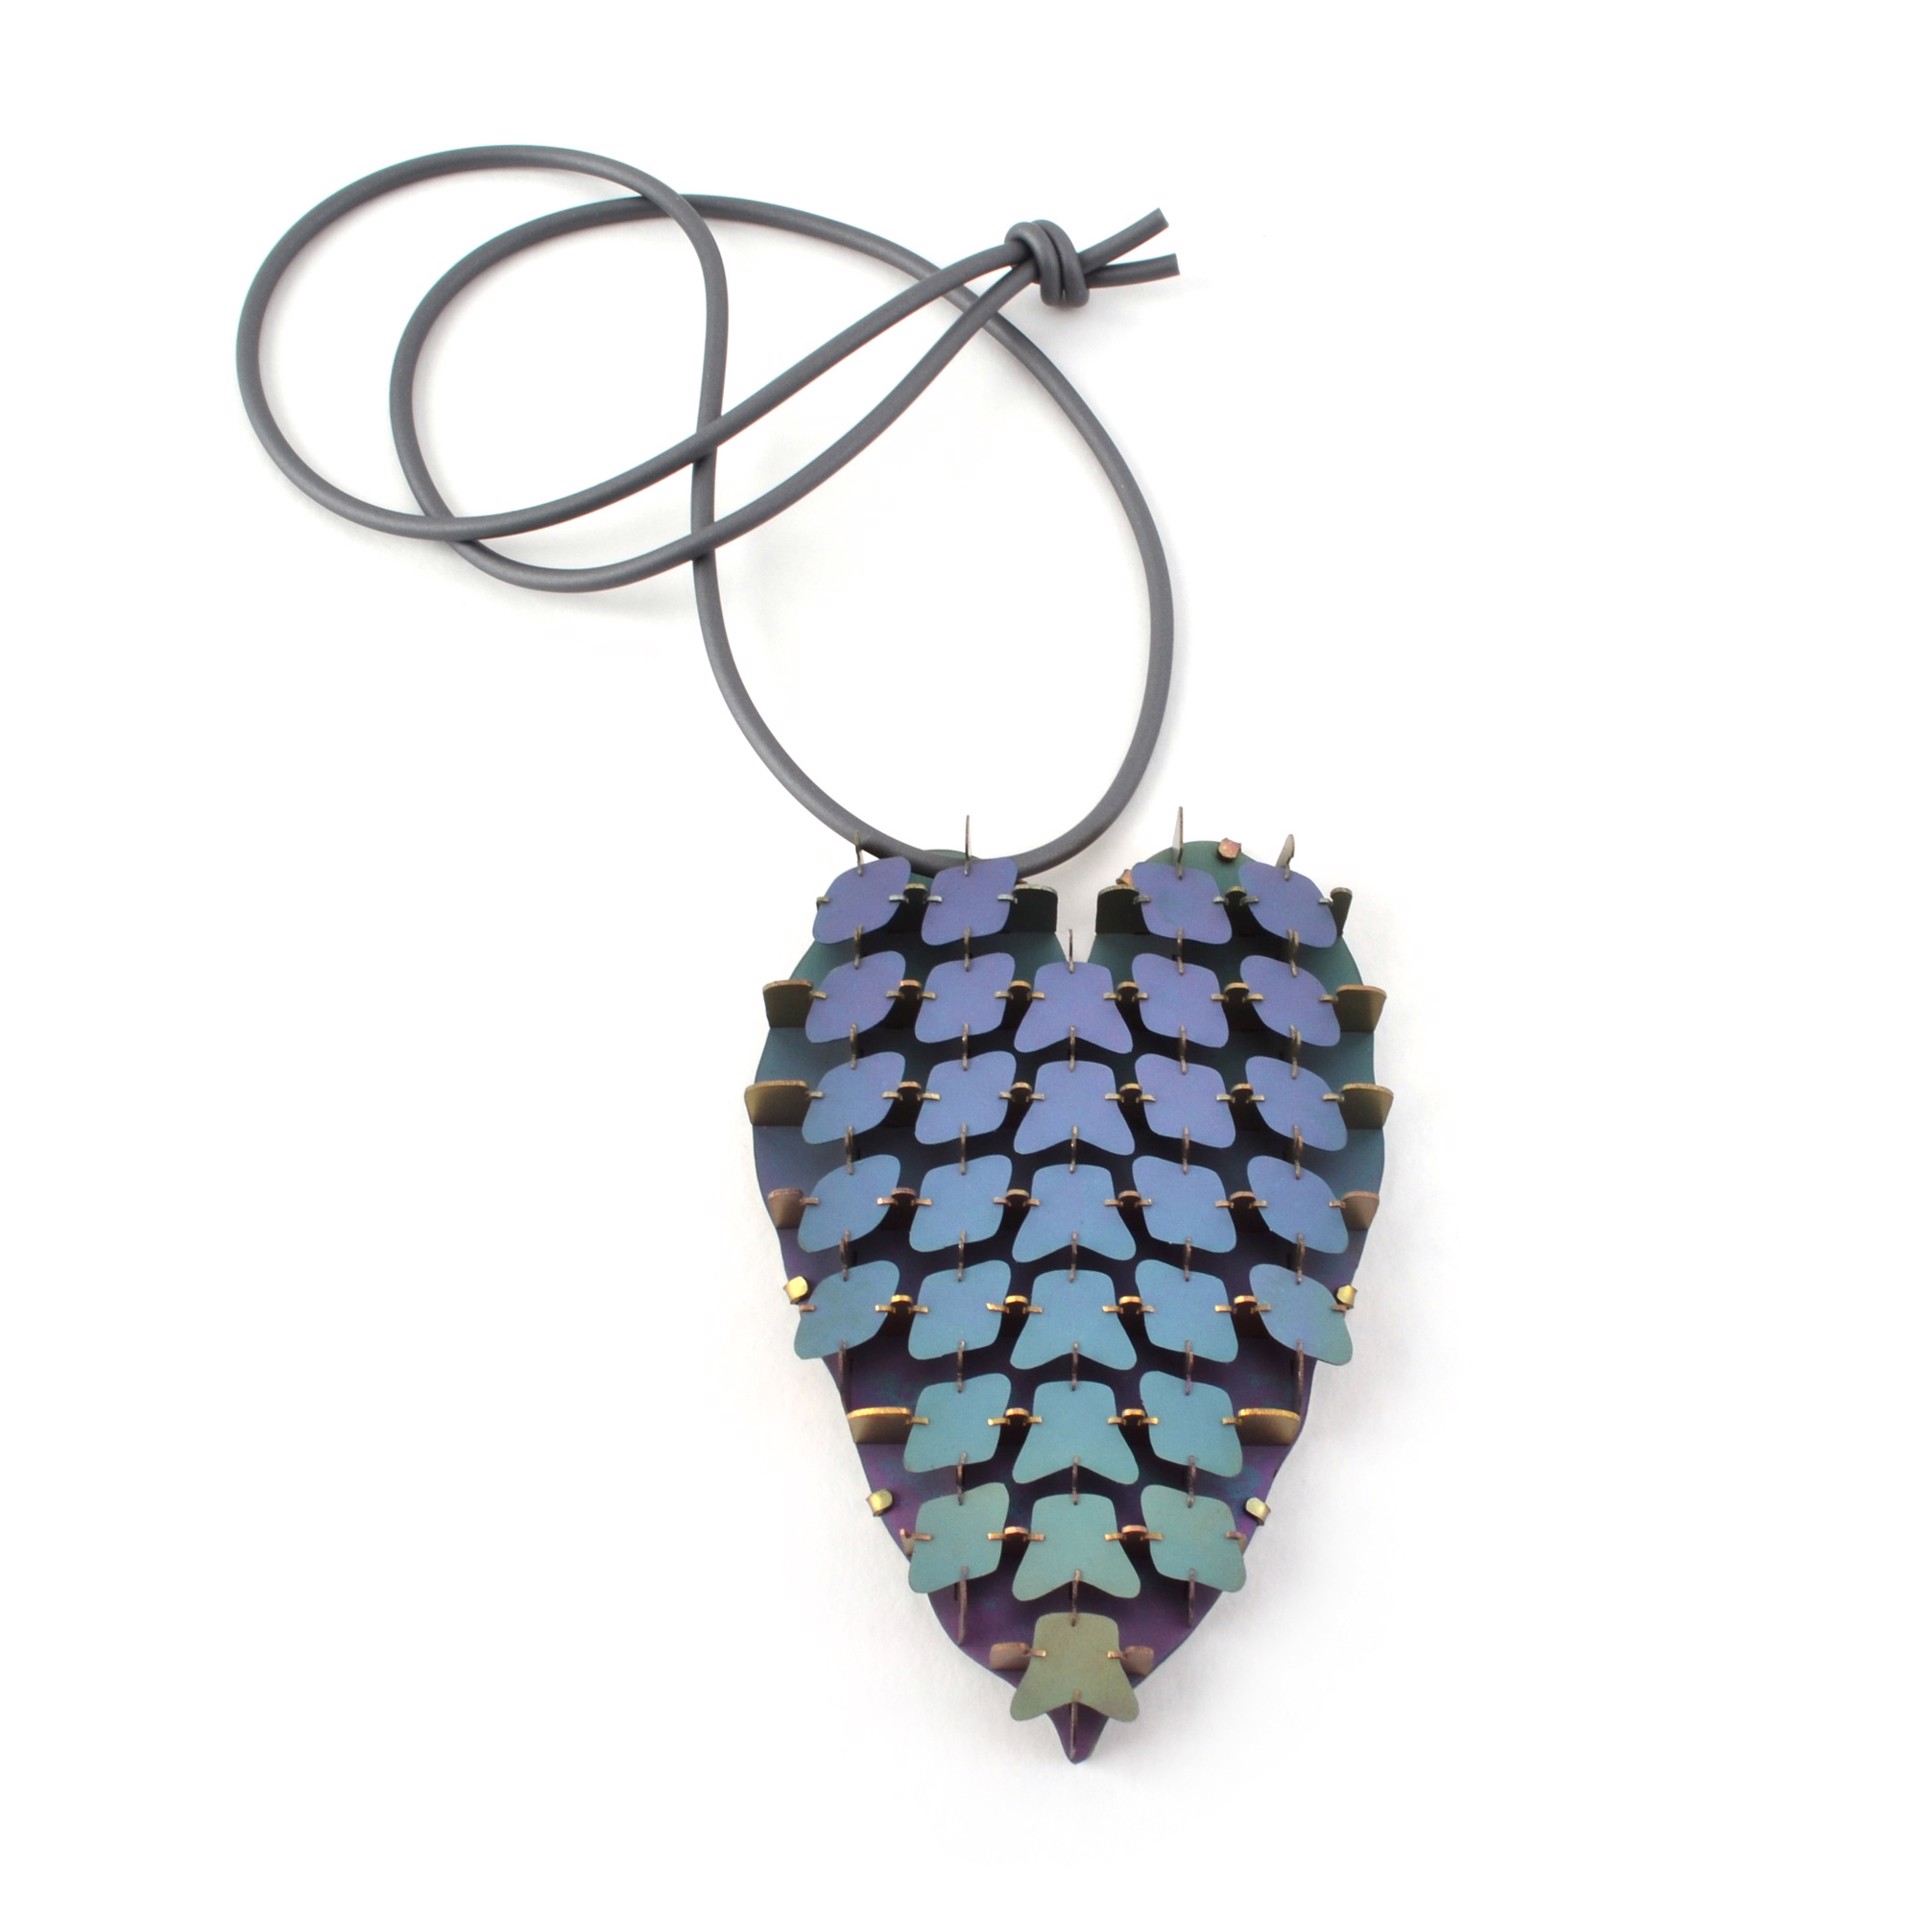 Slotted Leaf Pendant #1 by Mallory Weston